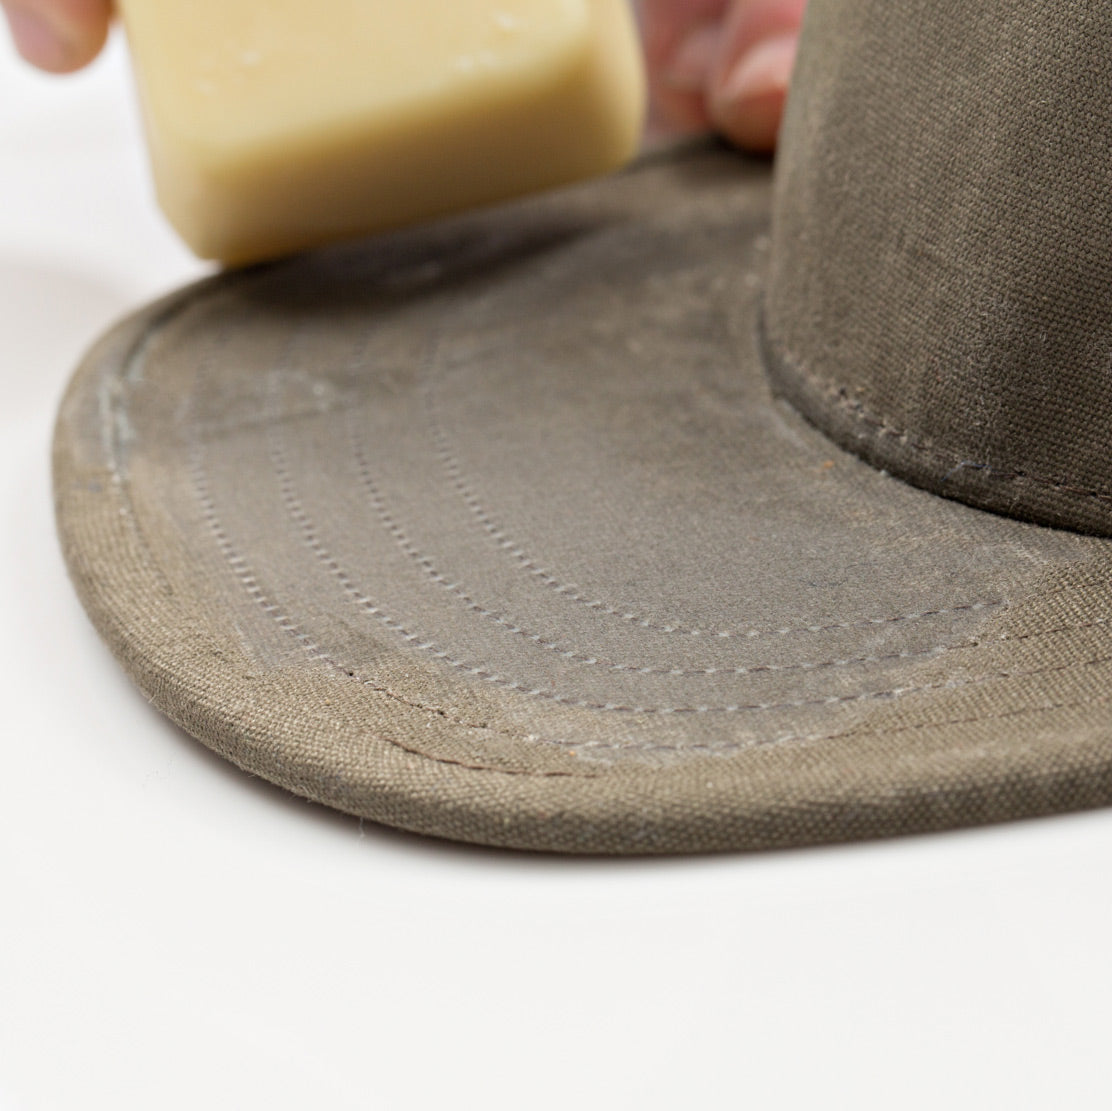 How To Wax A Hat With Otter Wax